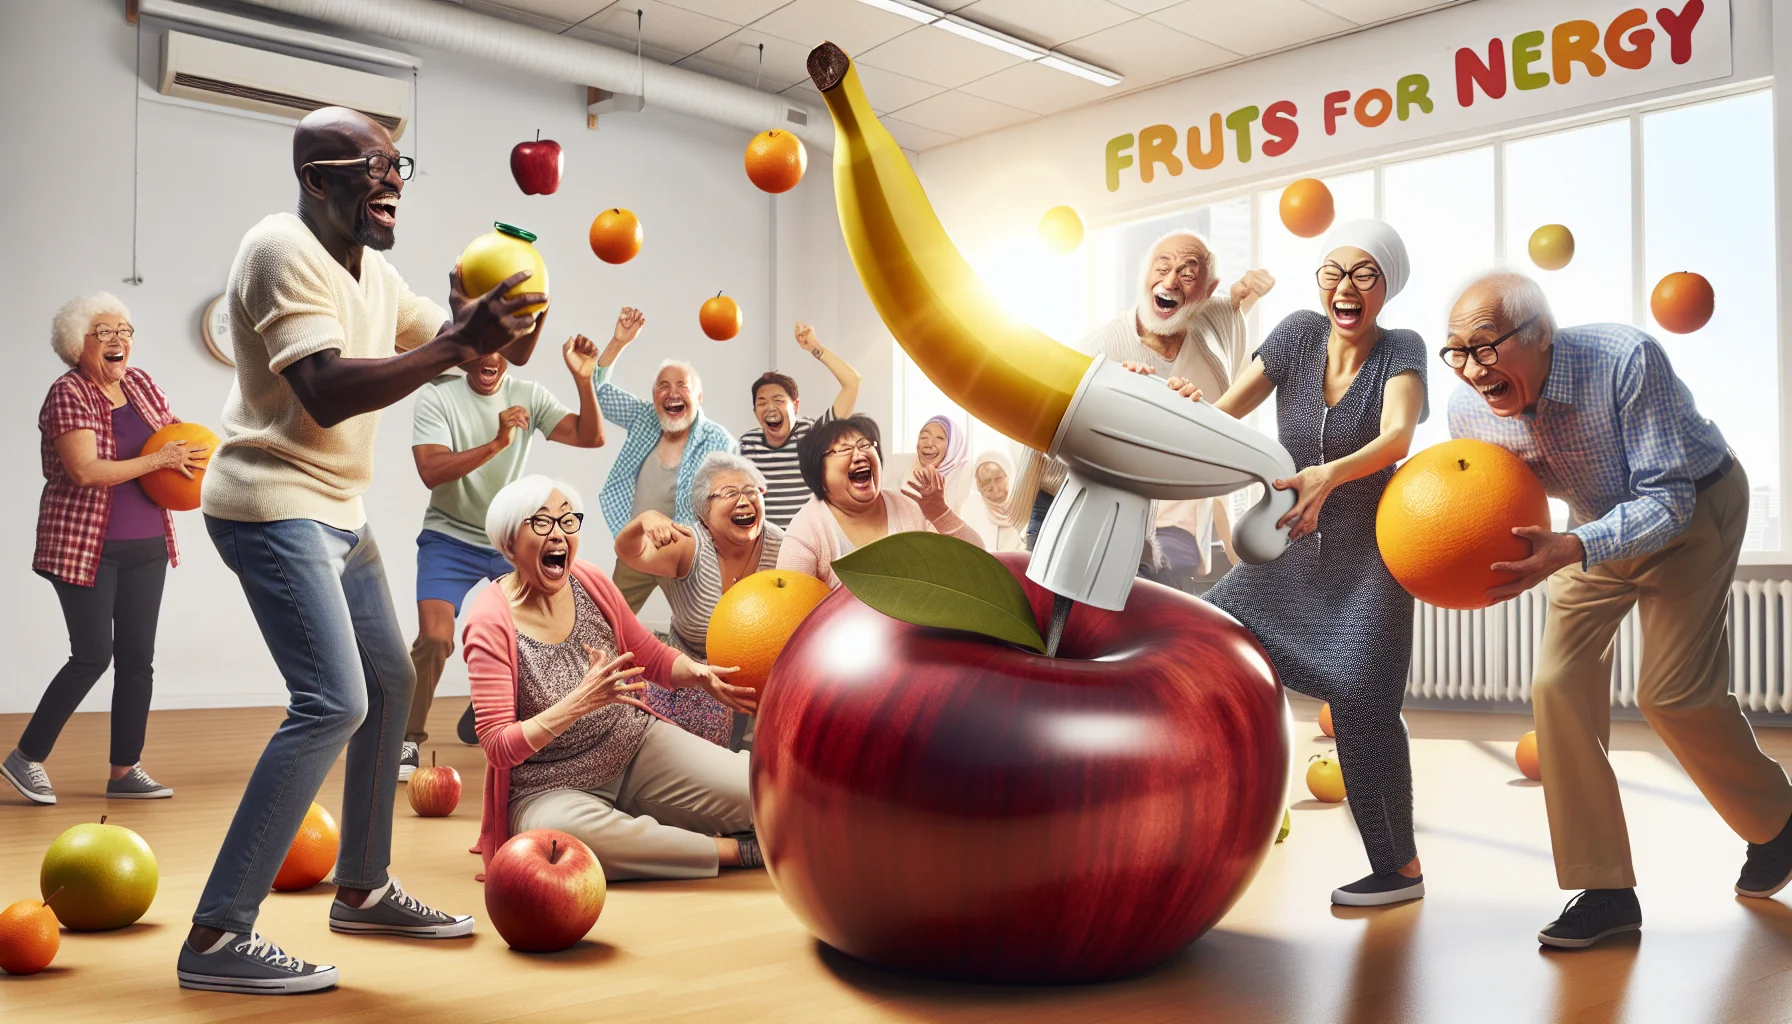 Imagine a humorously realistic scenario taking place in a bright, sunlit community center. In the scene, a group of lively elderly individuals of different descents including Middle-Eastern, Hispanic and Caucasian, are engaged in a fun 'Fruits for Energy' class. The instructor, an energetic South Asian woman, is enthusiastically showing them how to extract juice from an oversized, shiny apple using a comically large juicer. A Black male, with glasses on his forehead, is laughing hysterically as he struggles to hold a giant banana. A few others are juggling oranges, laughing and sharing stories about their old diets versus their new healthy eating habits.